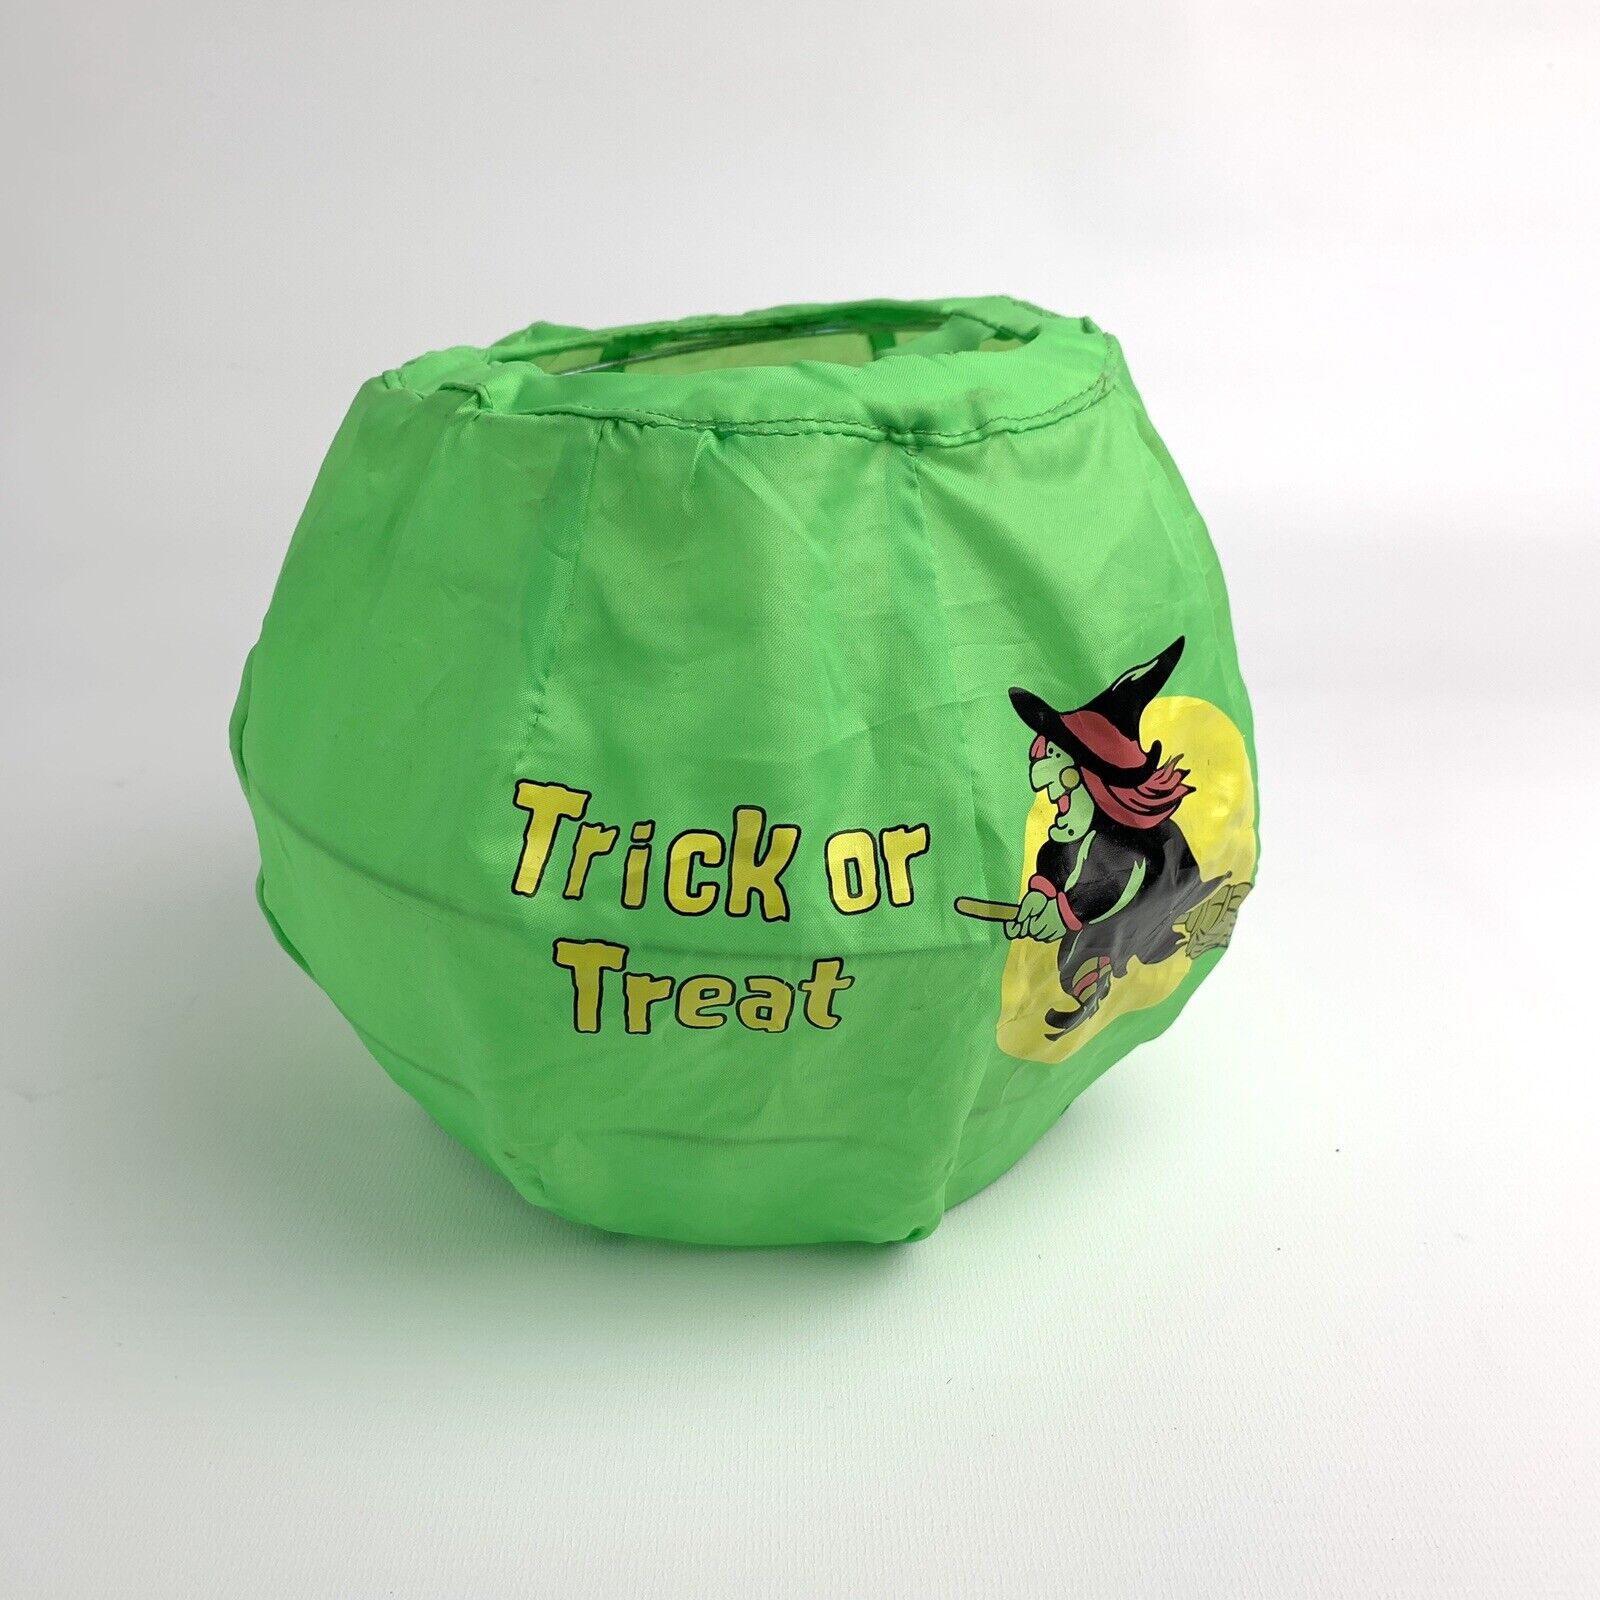 CLOTH TRICK OR TREAT COLLAPSABLE BUCKET WITH SPRING INSIDE BY GEMMY